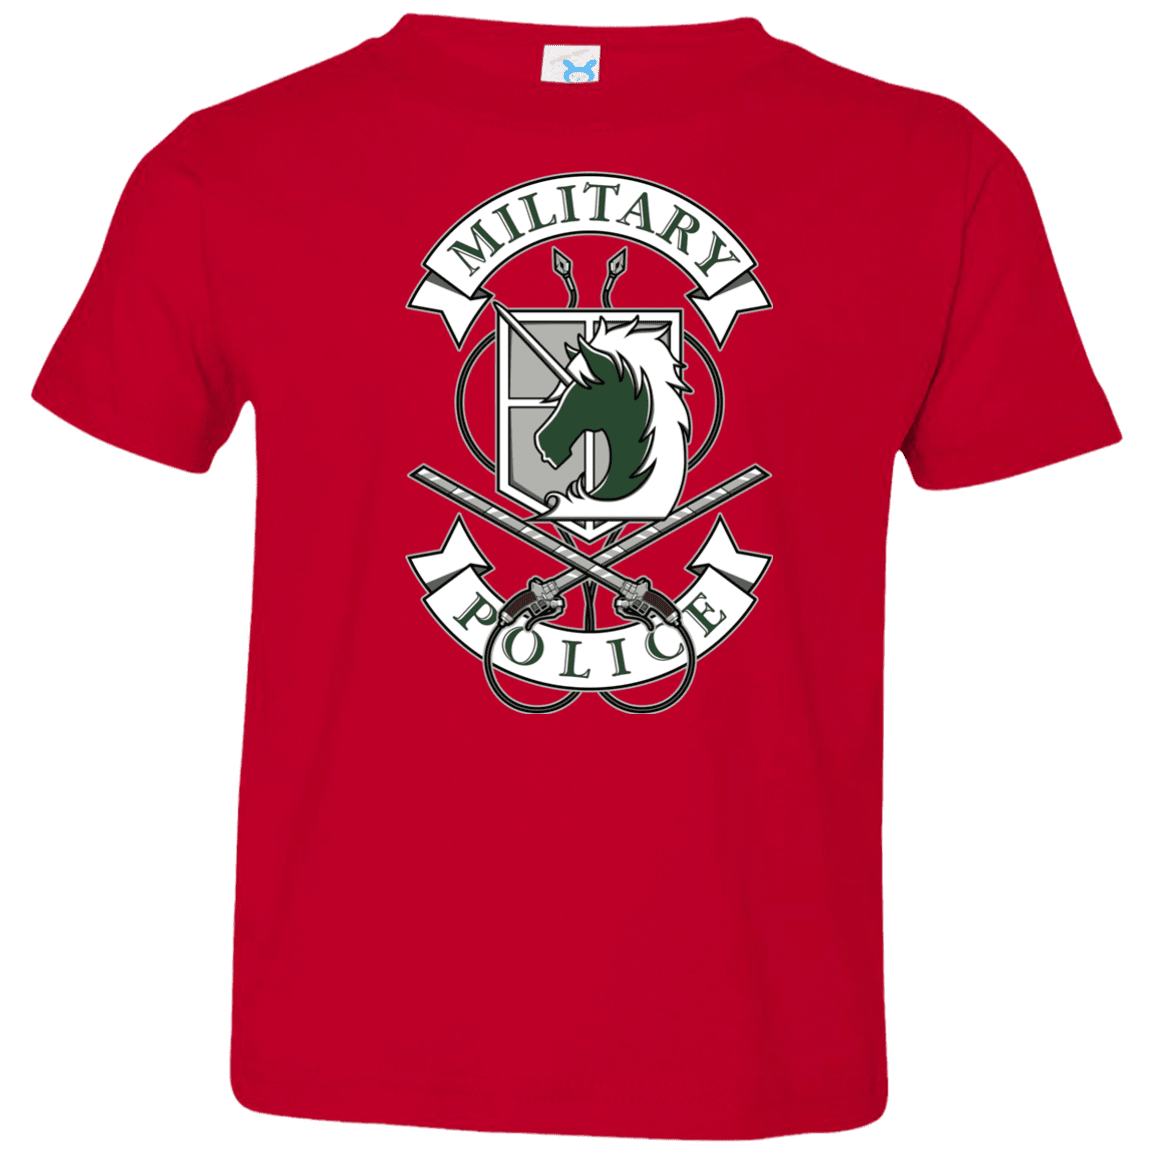 T-Shirts Red / 2T AoT Military Police Toddler Premium T-Shirt